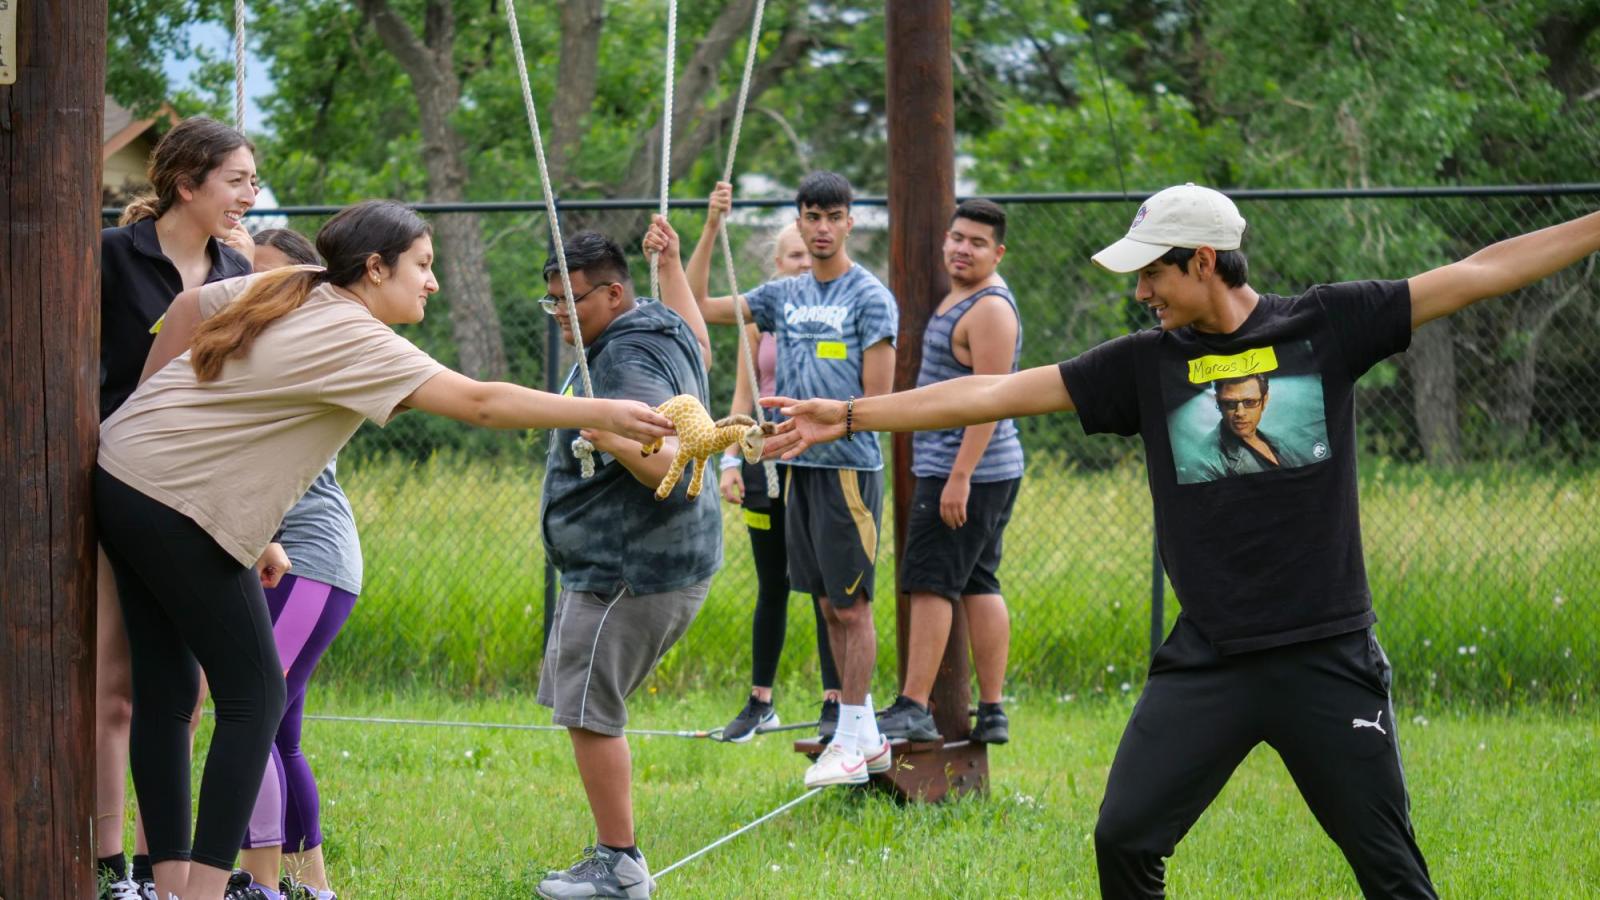 bridge students complete a ropes course together